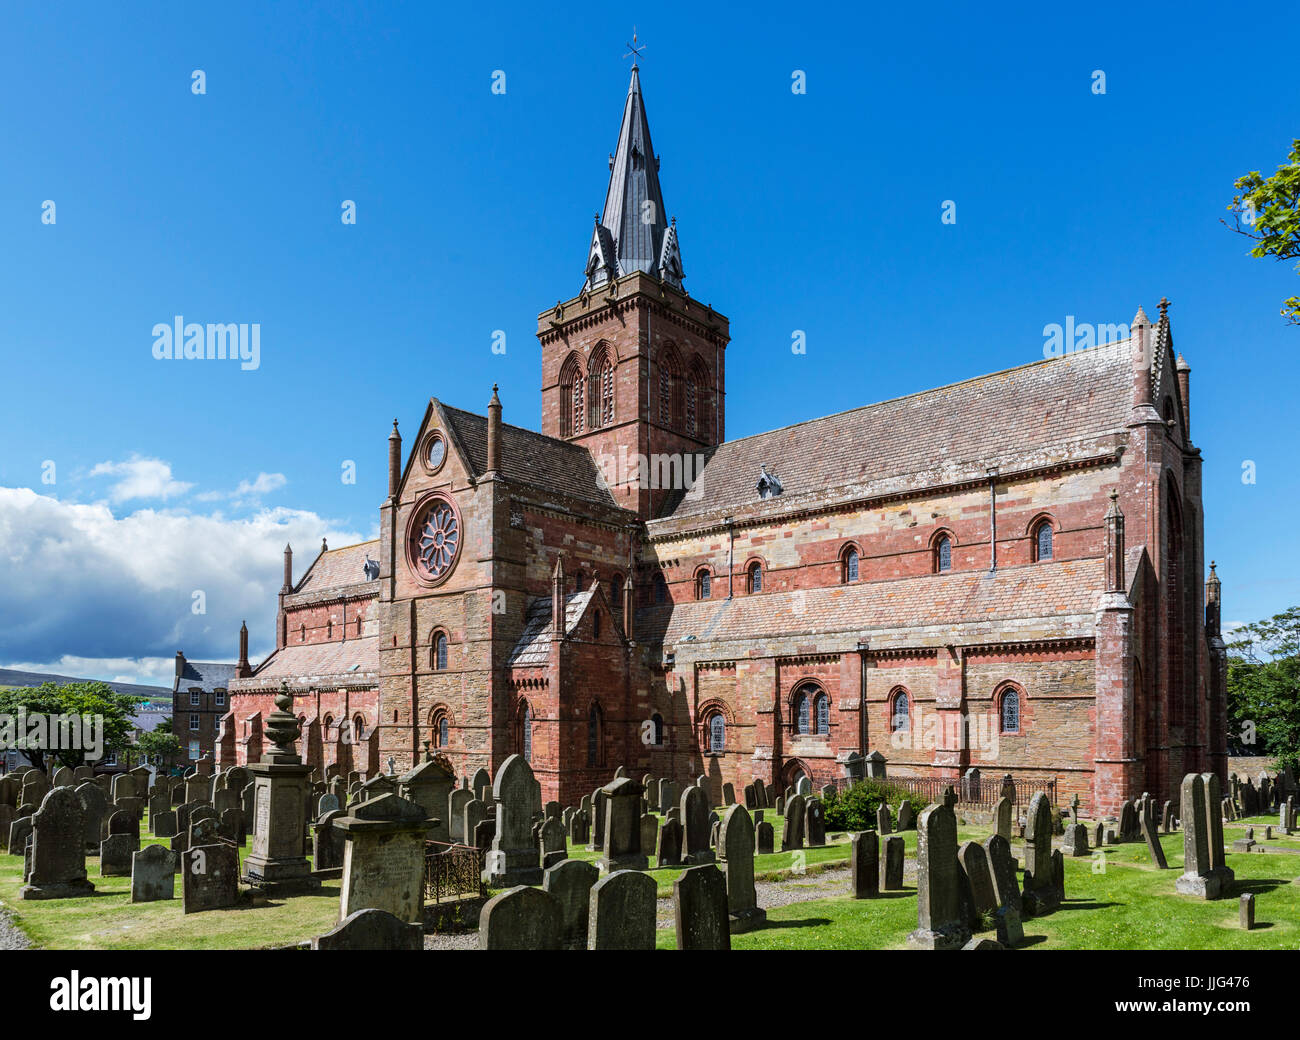 St Magnus Cathedral, Kirkwall, Orkney, continentale, Ecosse, Royaume-Uni Banque D'Images